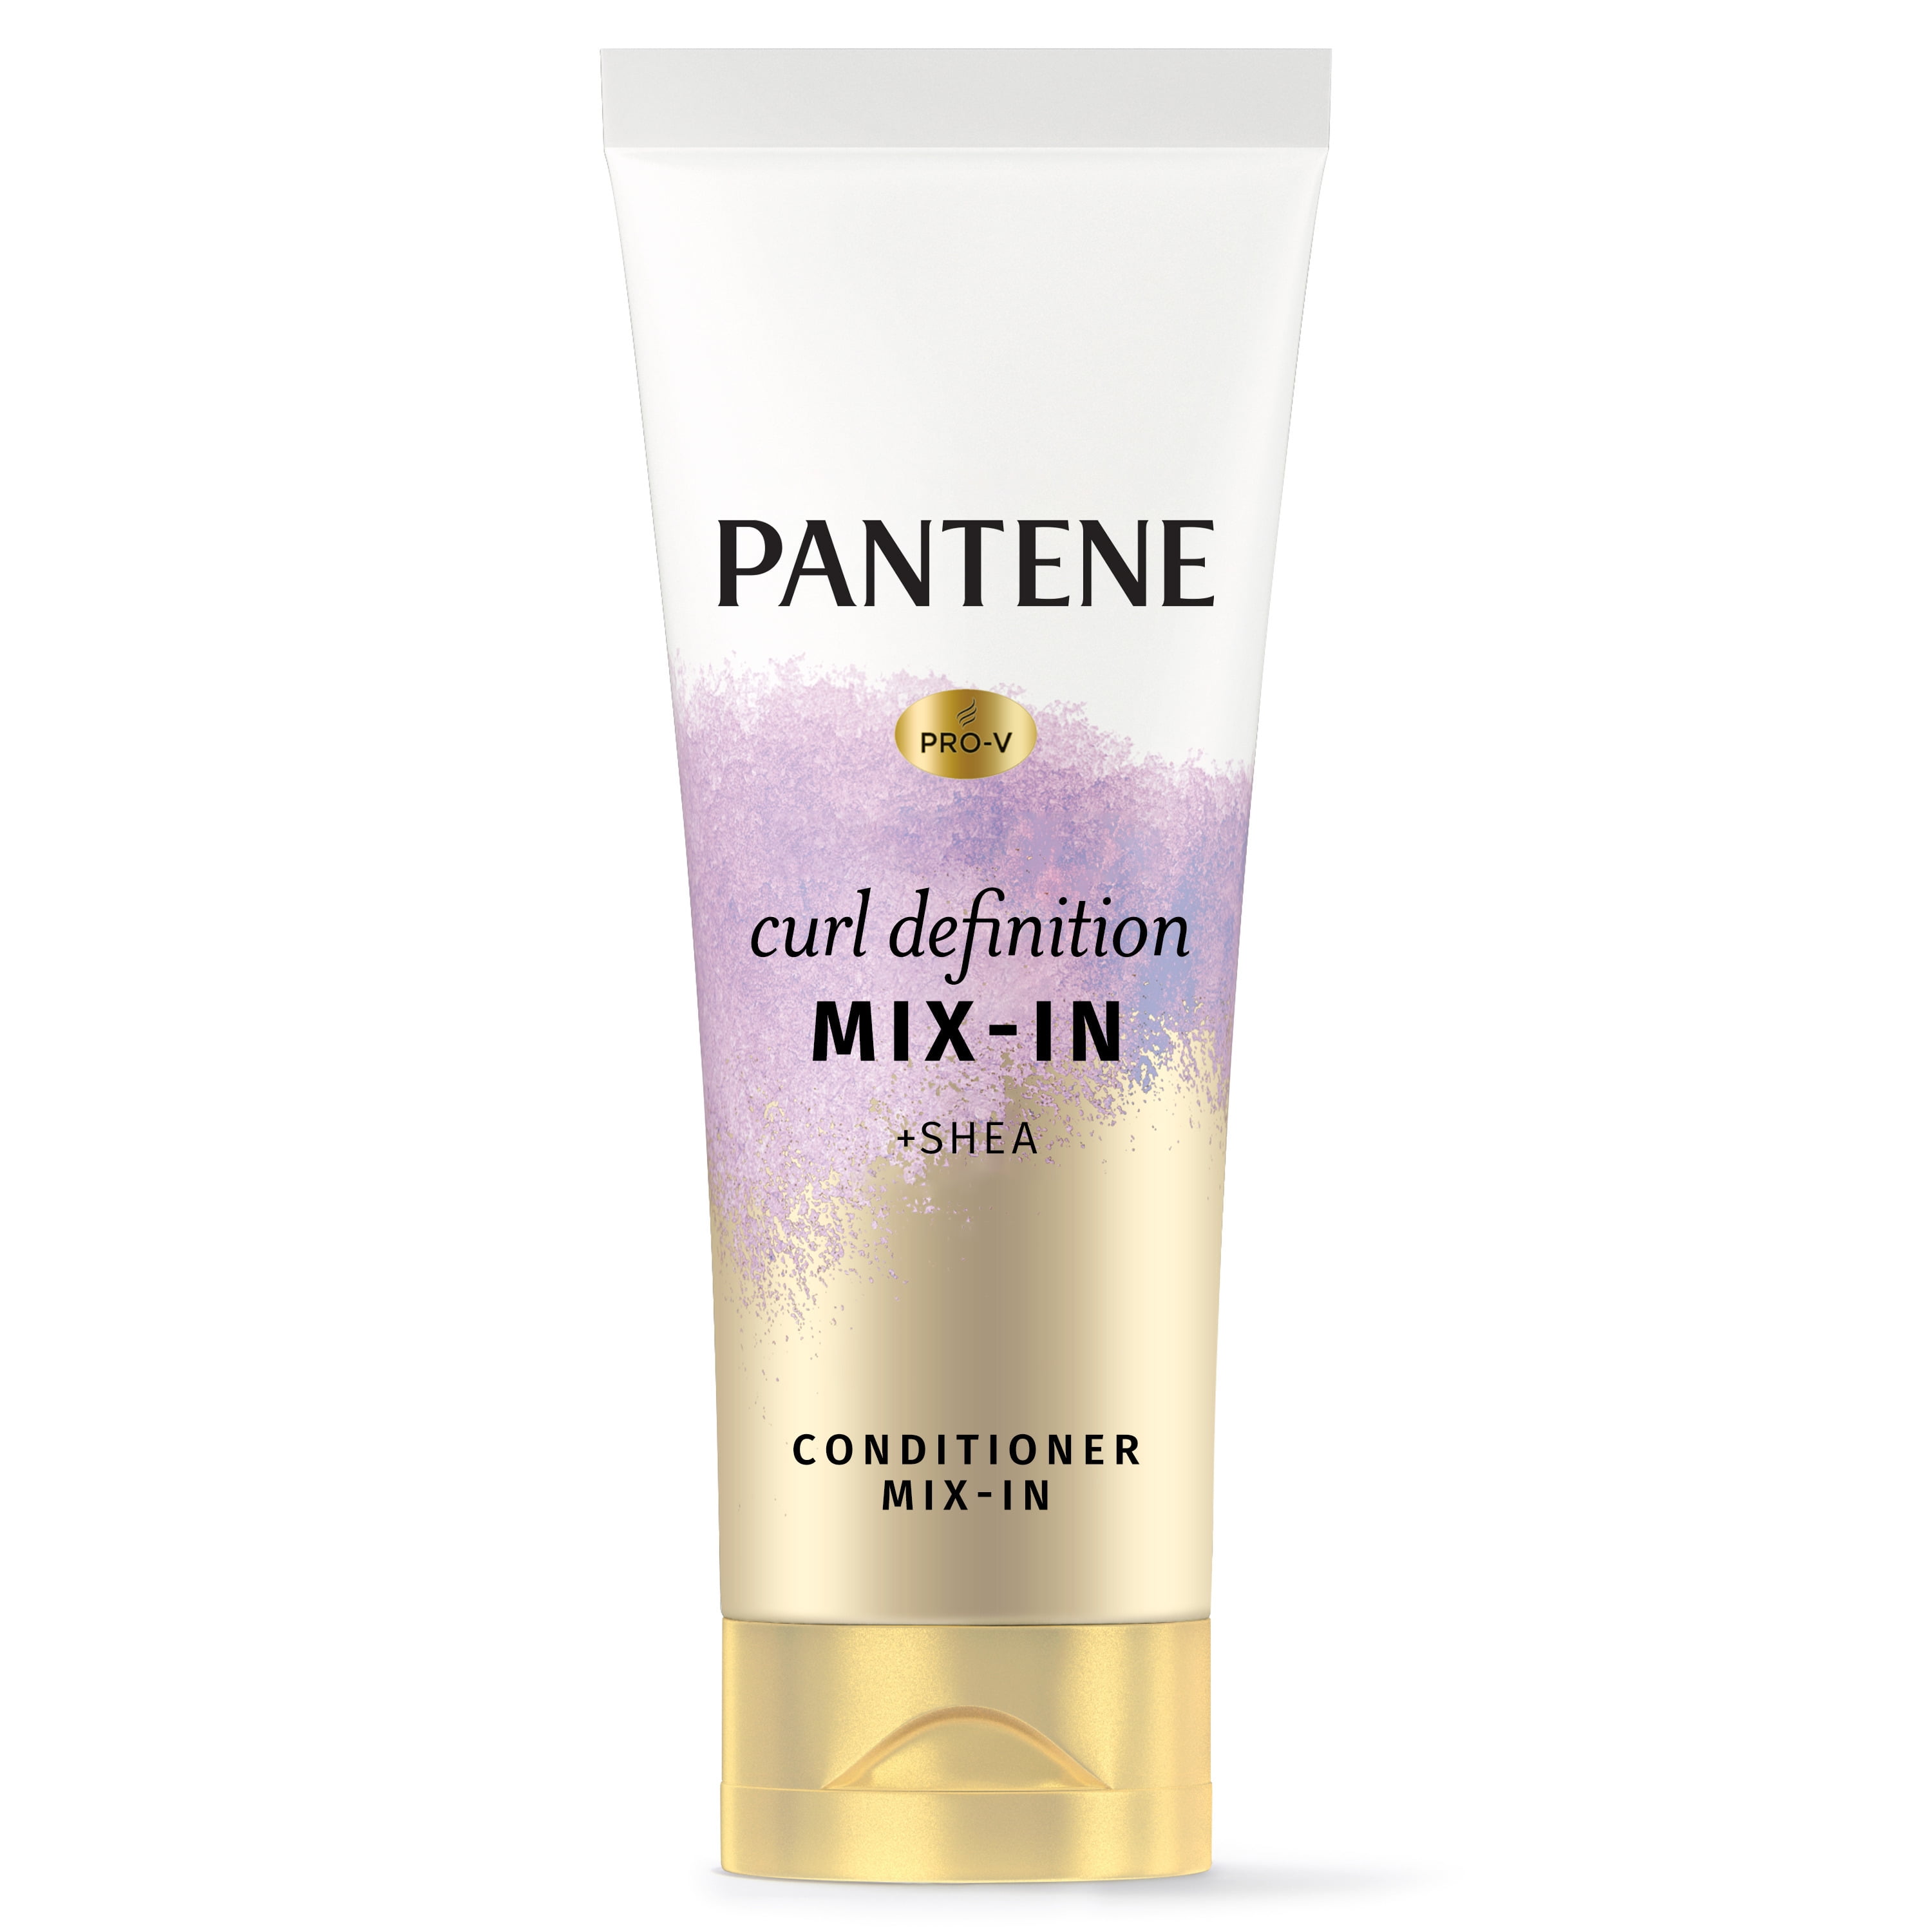 Pantene Curl Conditioner Mix-in, Moisturizing and Curl Defining with Shea Butter, 2.5 oz